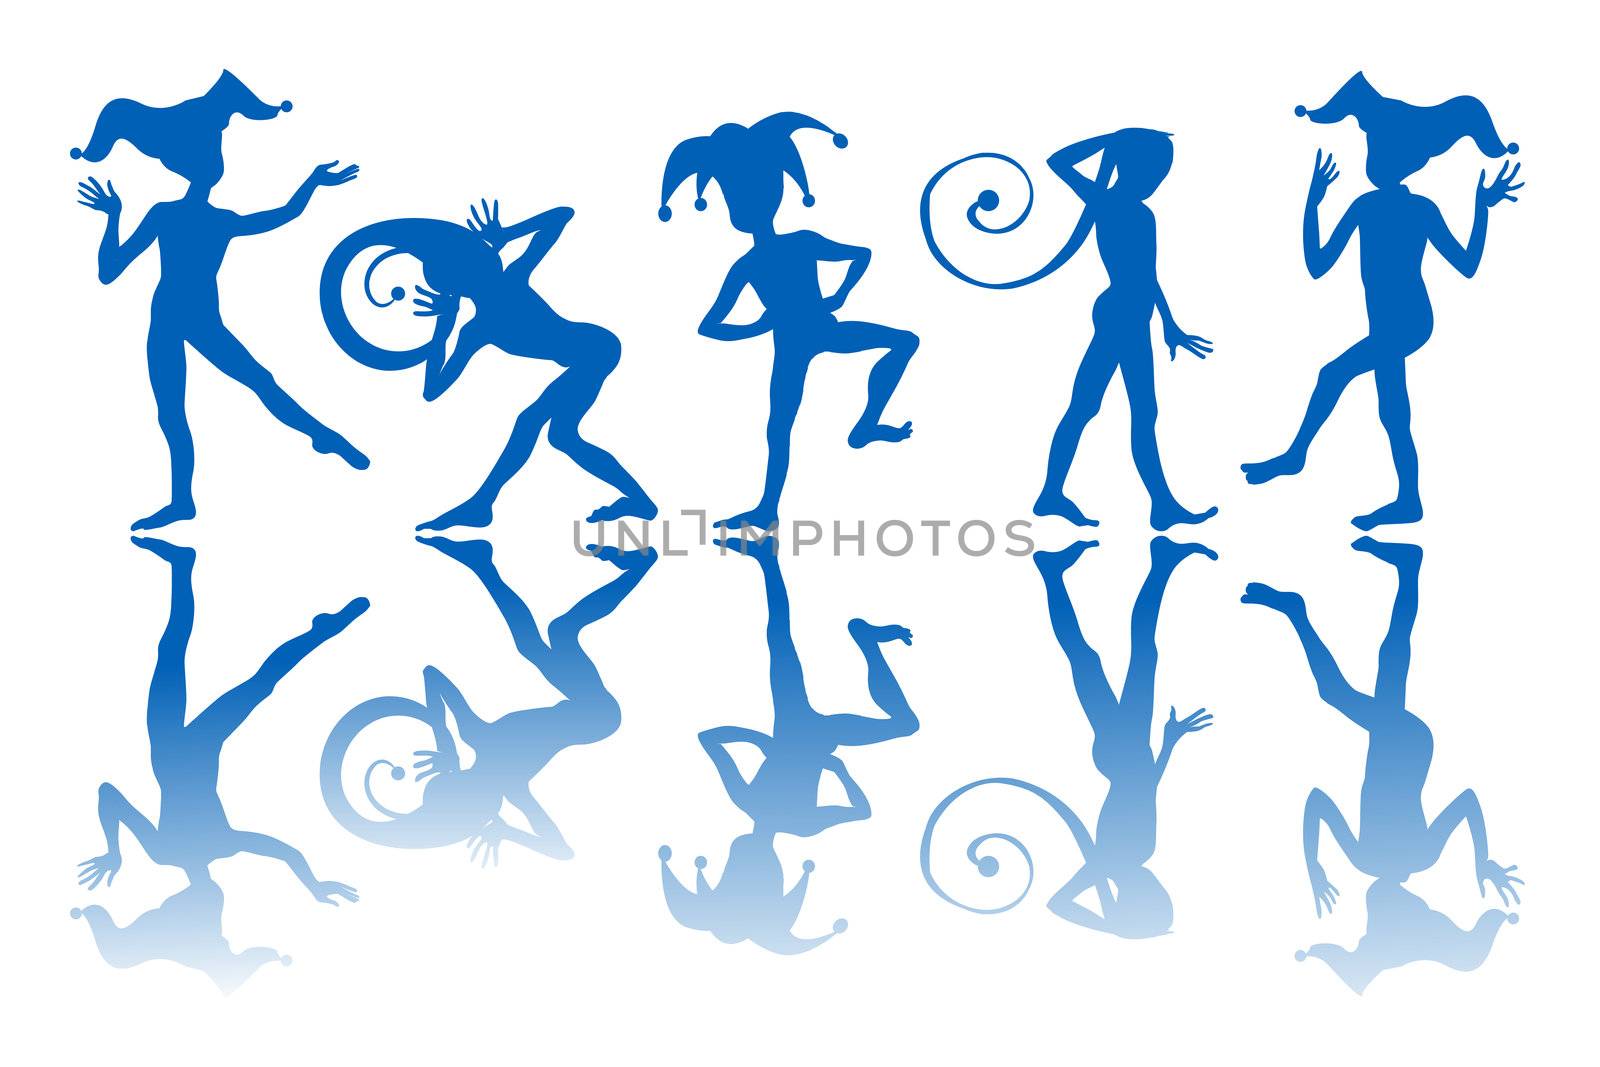 Dancing harlequins silhouettes and reflection over white background.